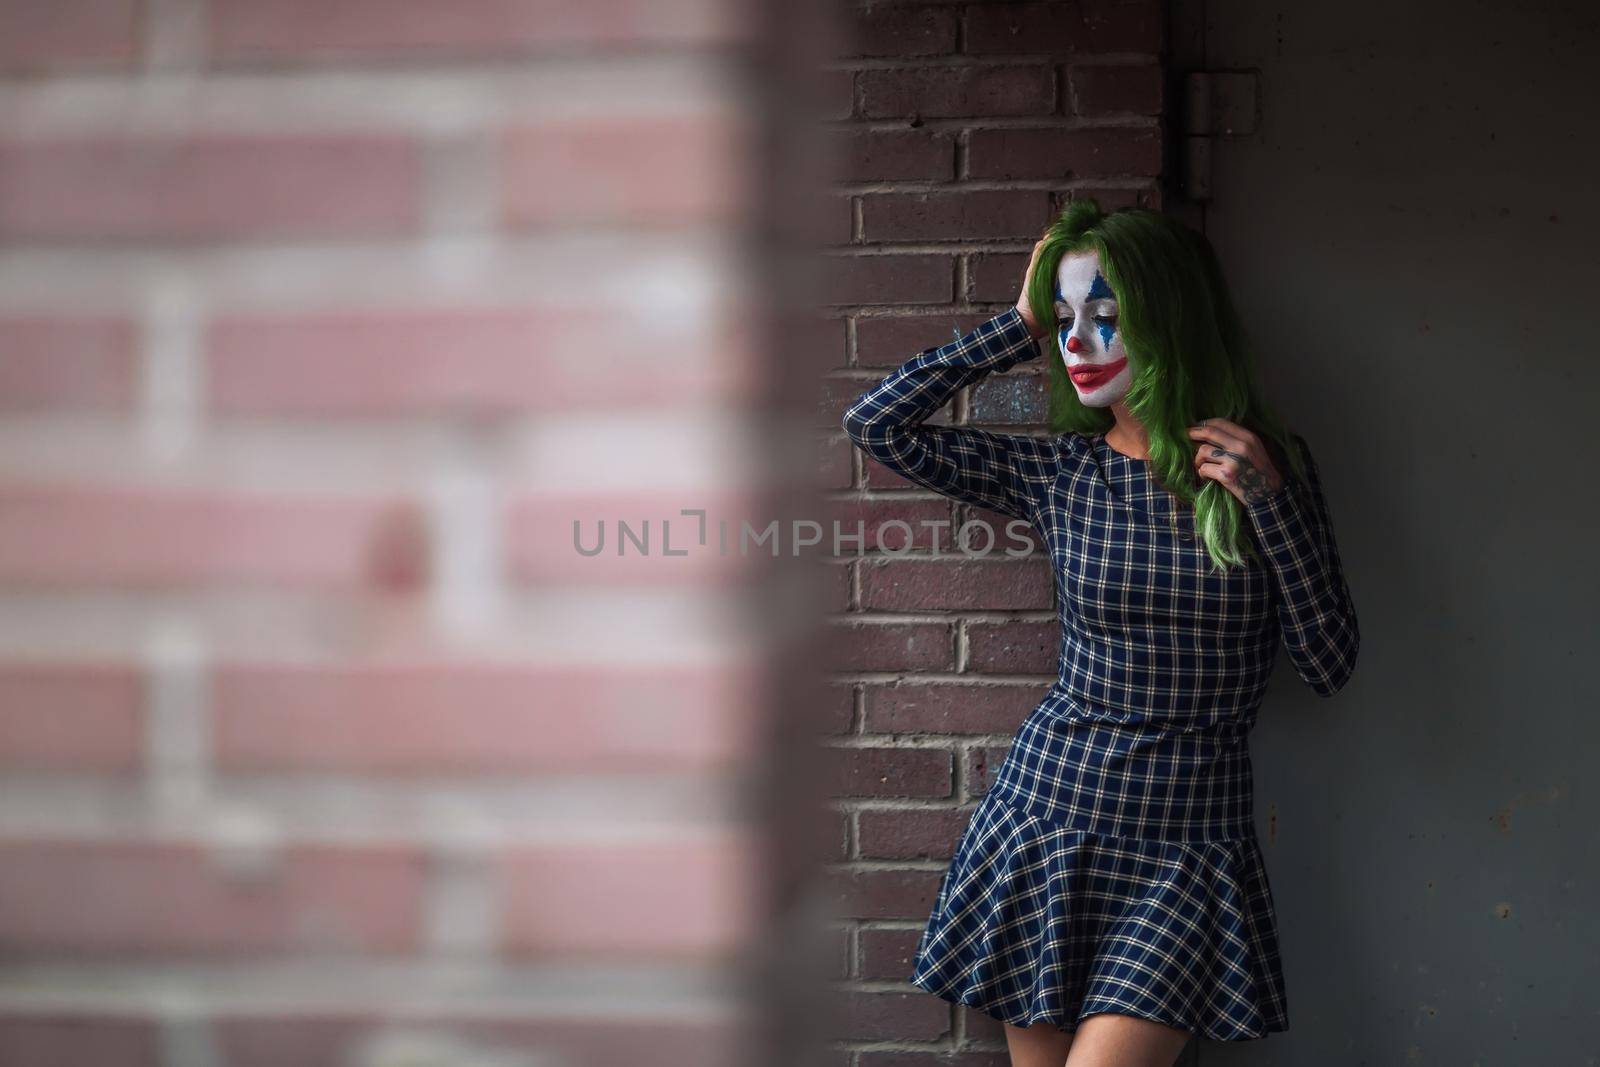 Portrait of a greenhaired girl in chekered dress with joker makeup on a brick wall blurred background.